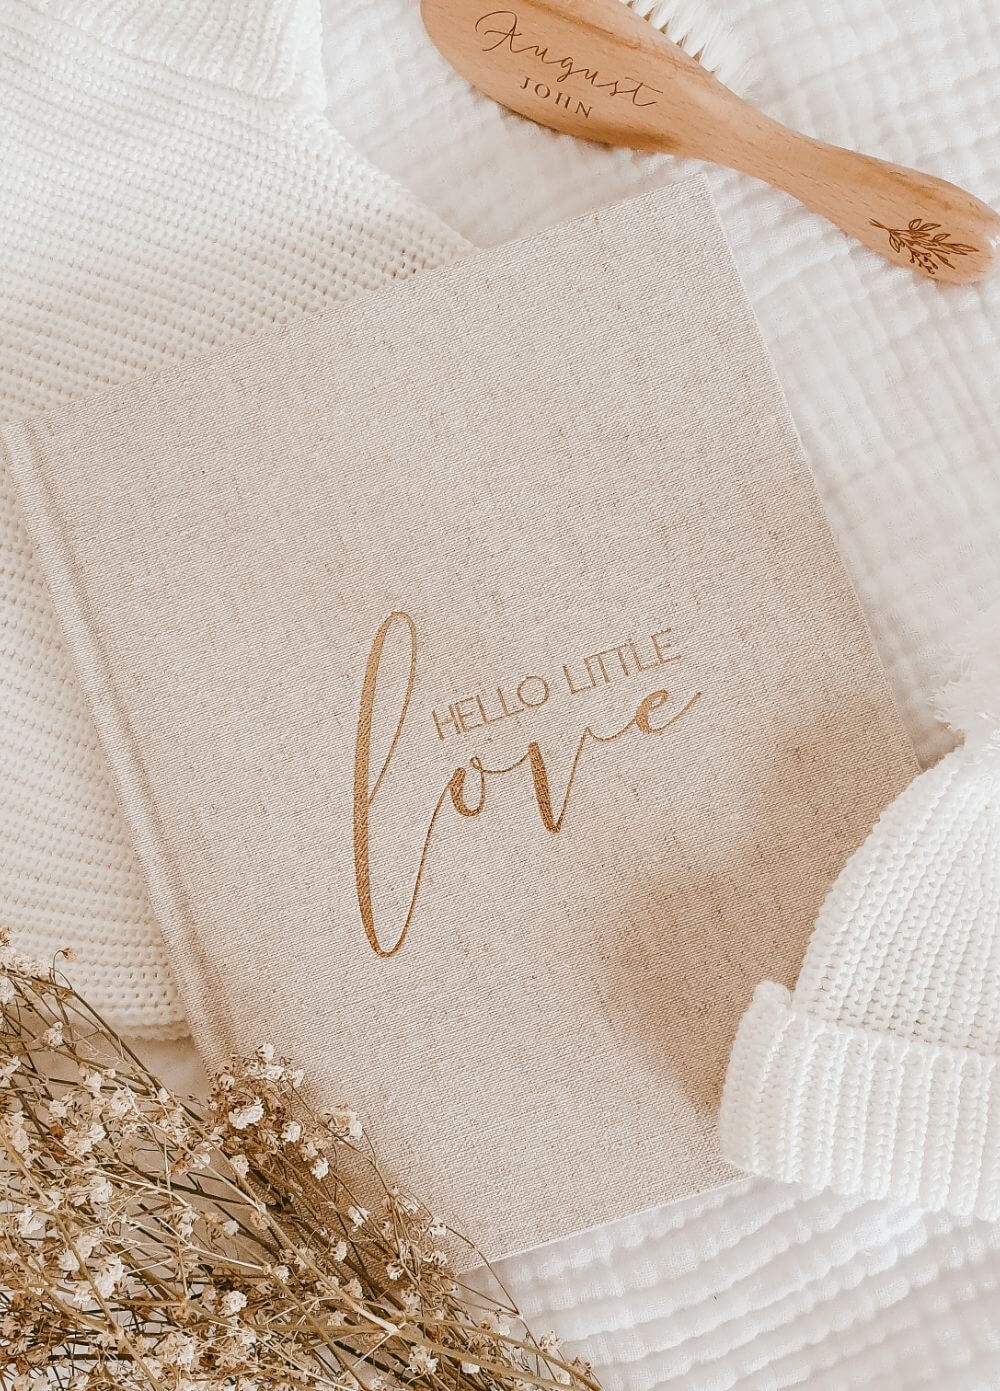 Hello Little Love Pregnancy & Baby Journal in Sand by Blossom & Pear